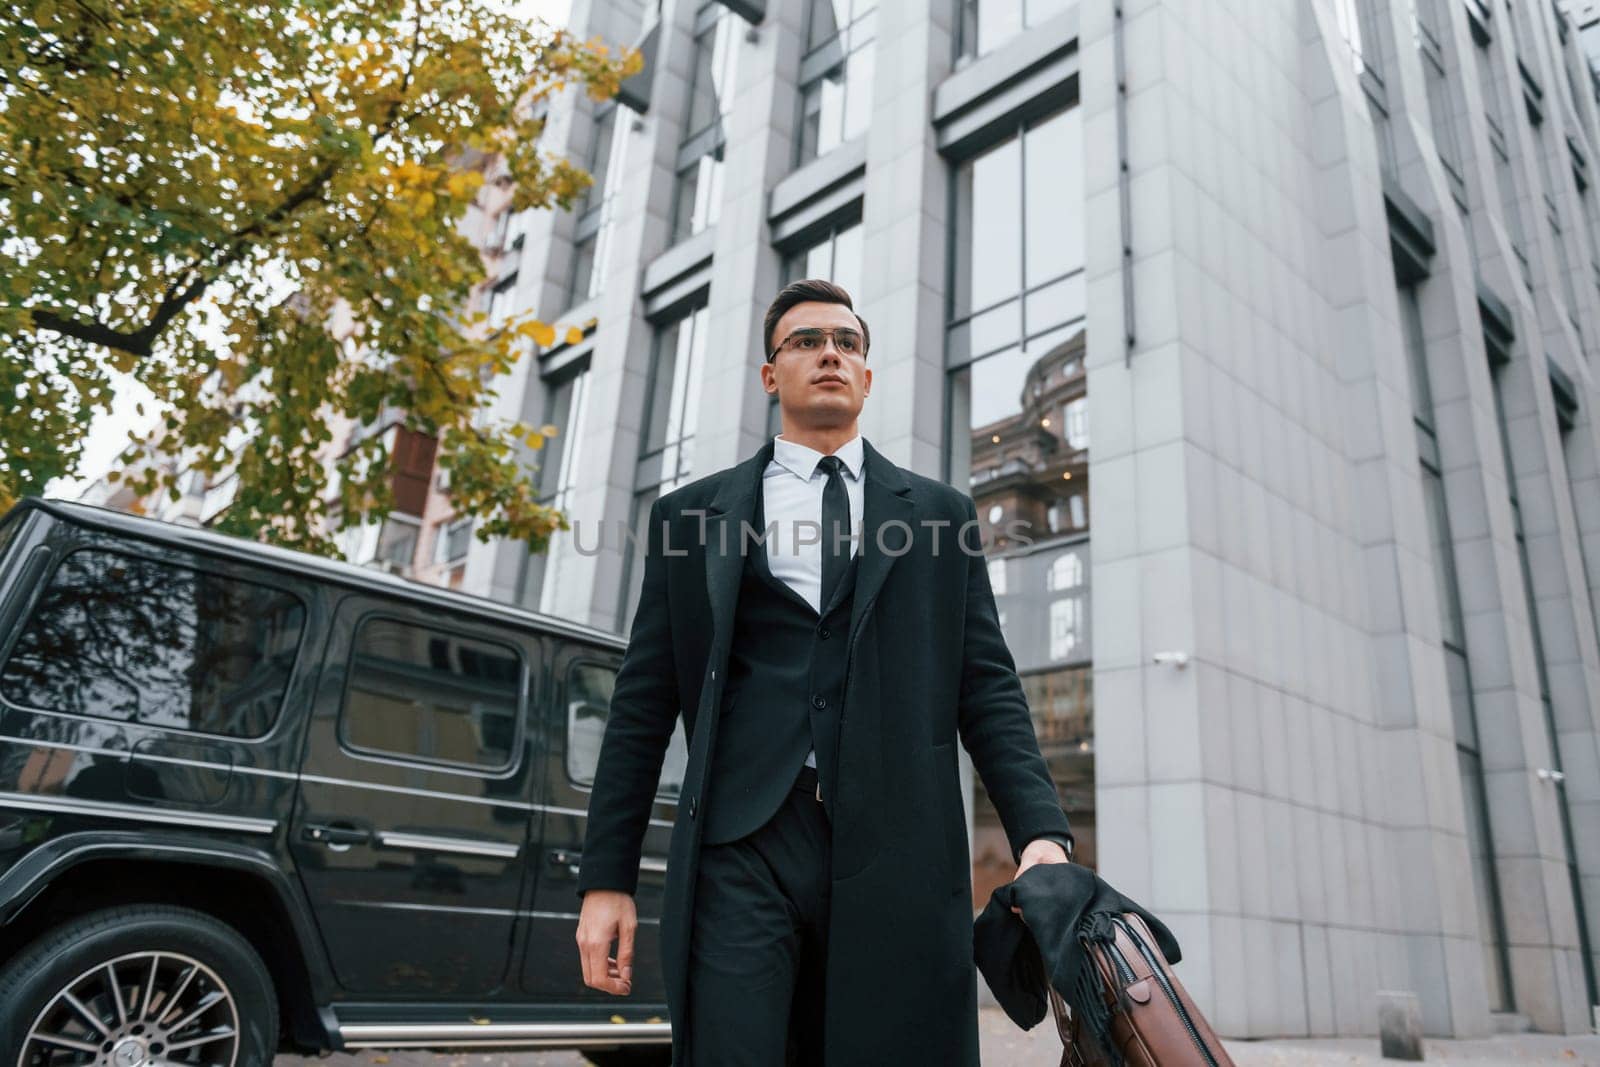 Standing against black car. Businessman in black suit and tie is outdoors in the city.